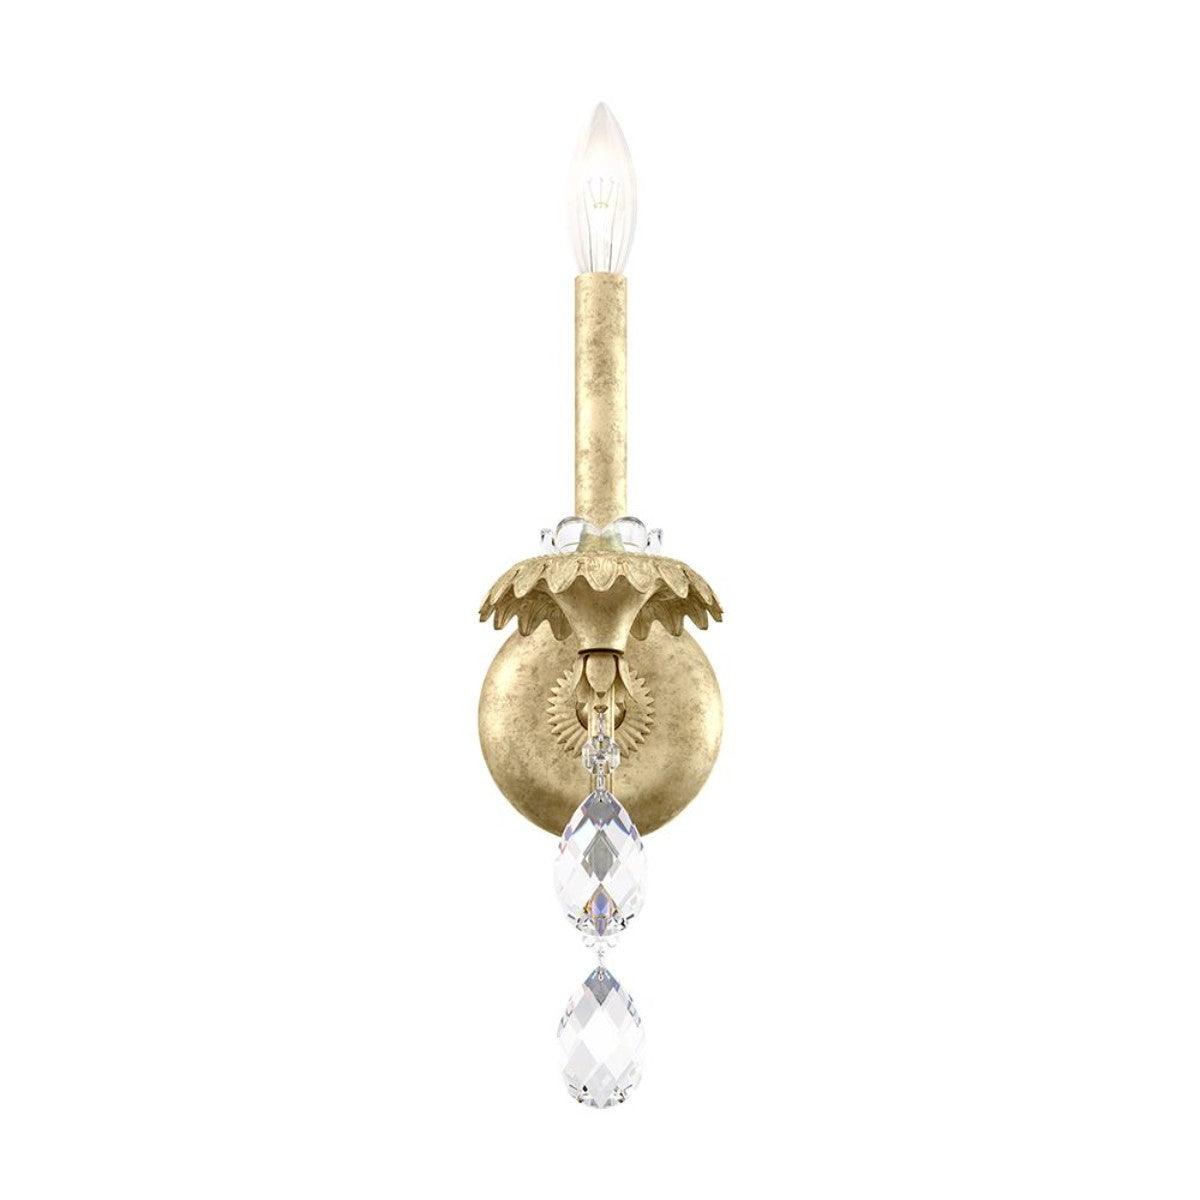 Helenia 17 inch Armed Sconce with Clear Heritage Crystals